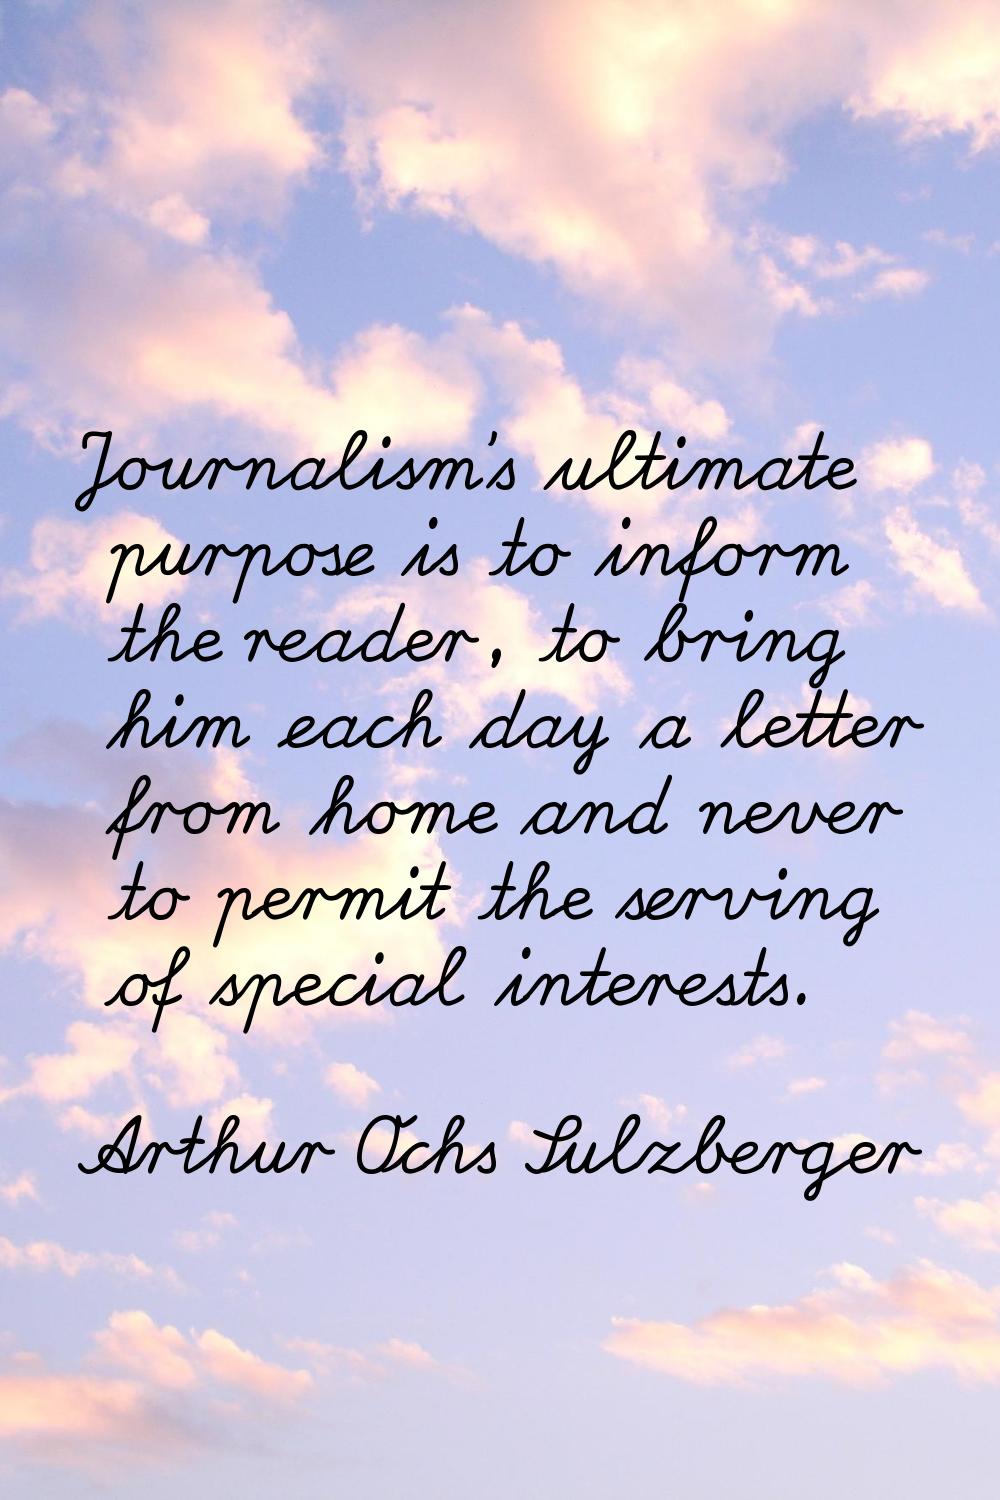 Journalism's ultimate purpose is to inform the reader, to bring him each day a letter from home and